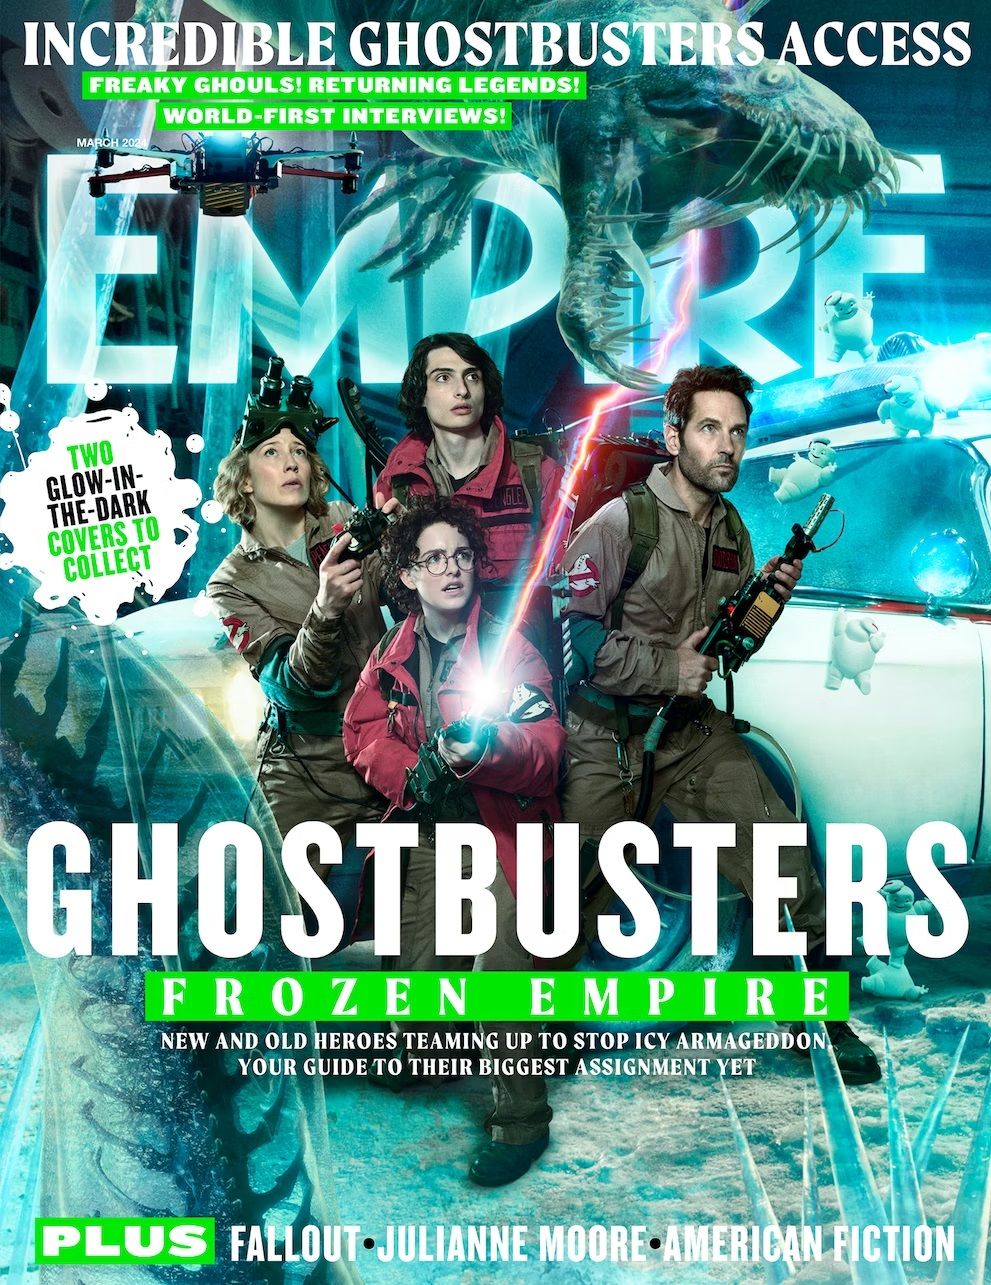 Empire Magazine's Ghostbusters Frozen Empire cover featuring Carrie Coon, Finn Wolfhard, Mckenna Grace and Paul Rudd